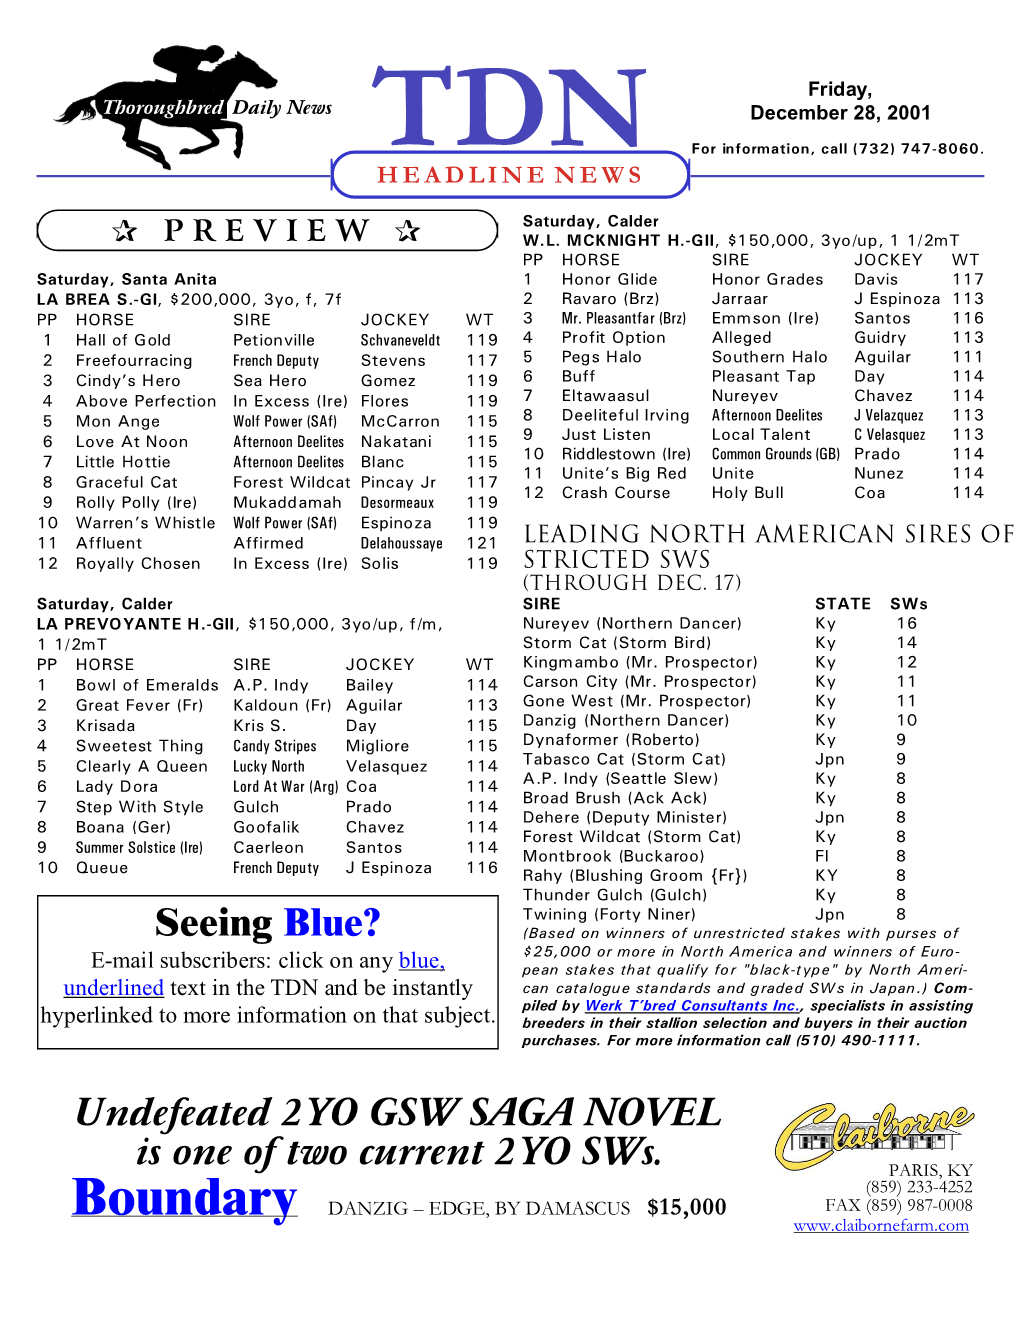 Undefeated 2YO GSW SAGA NOVEL Is One of Two Current 2YO Sws